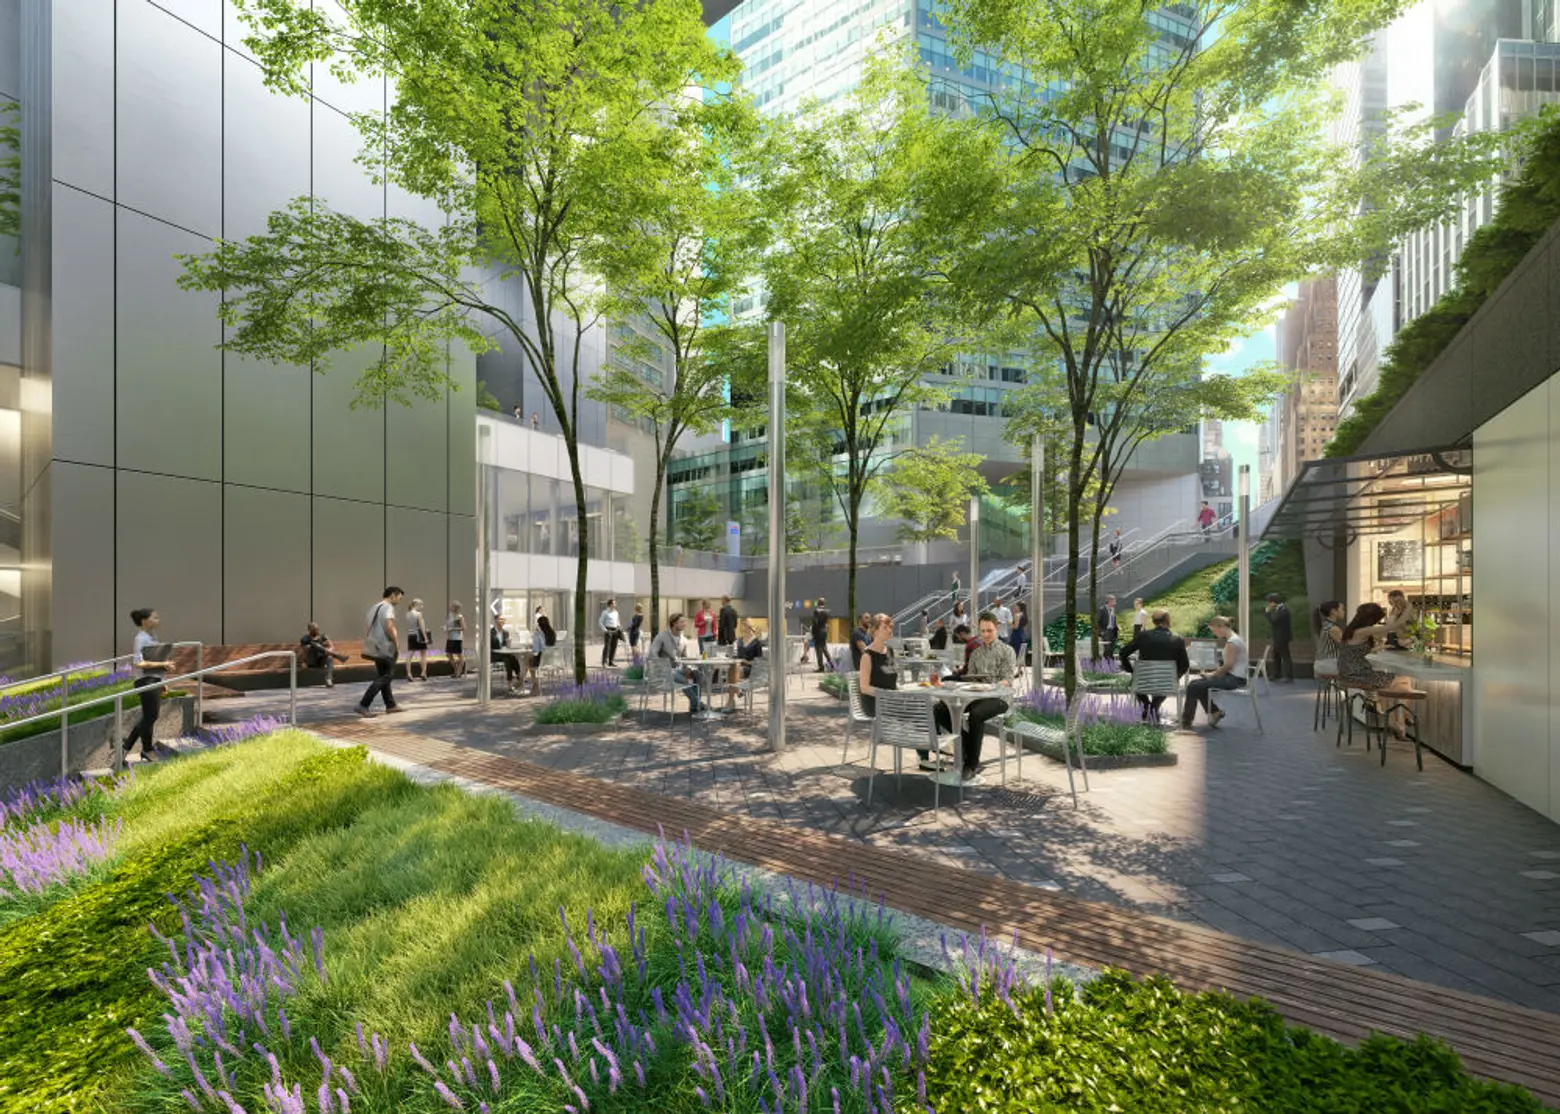 Former Citicorp Center might lose Sasaki fountain as part of plaza redesign